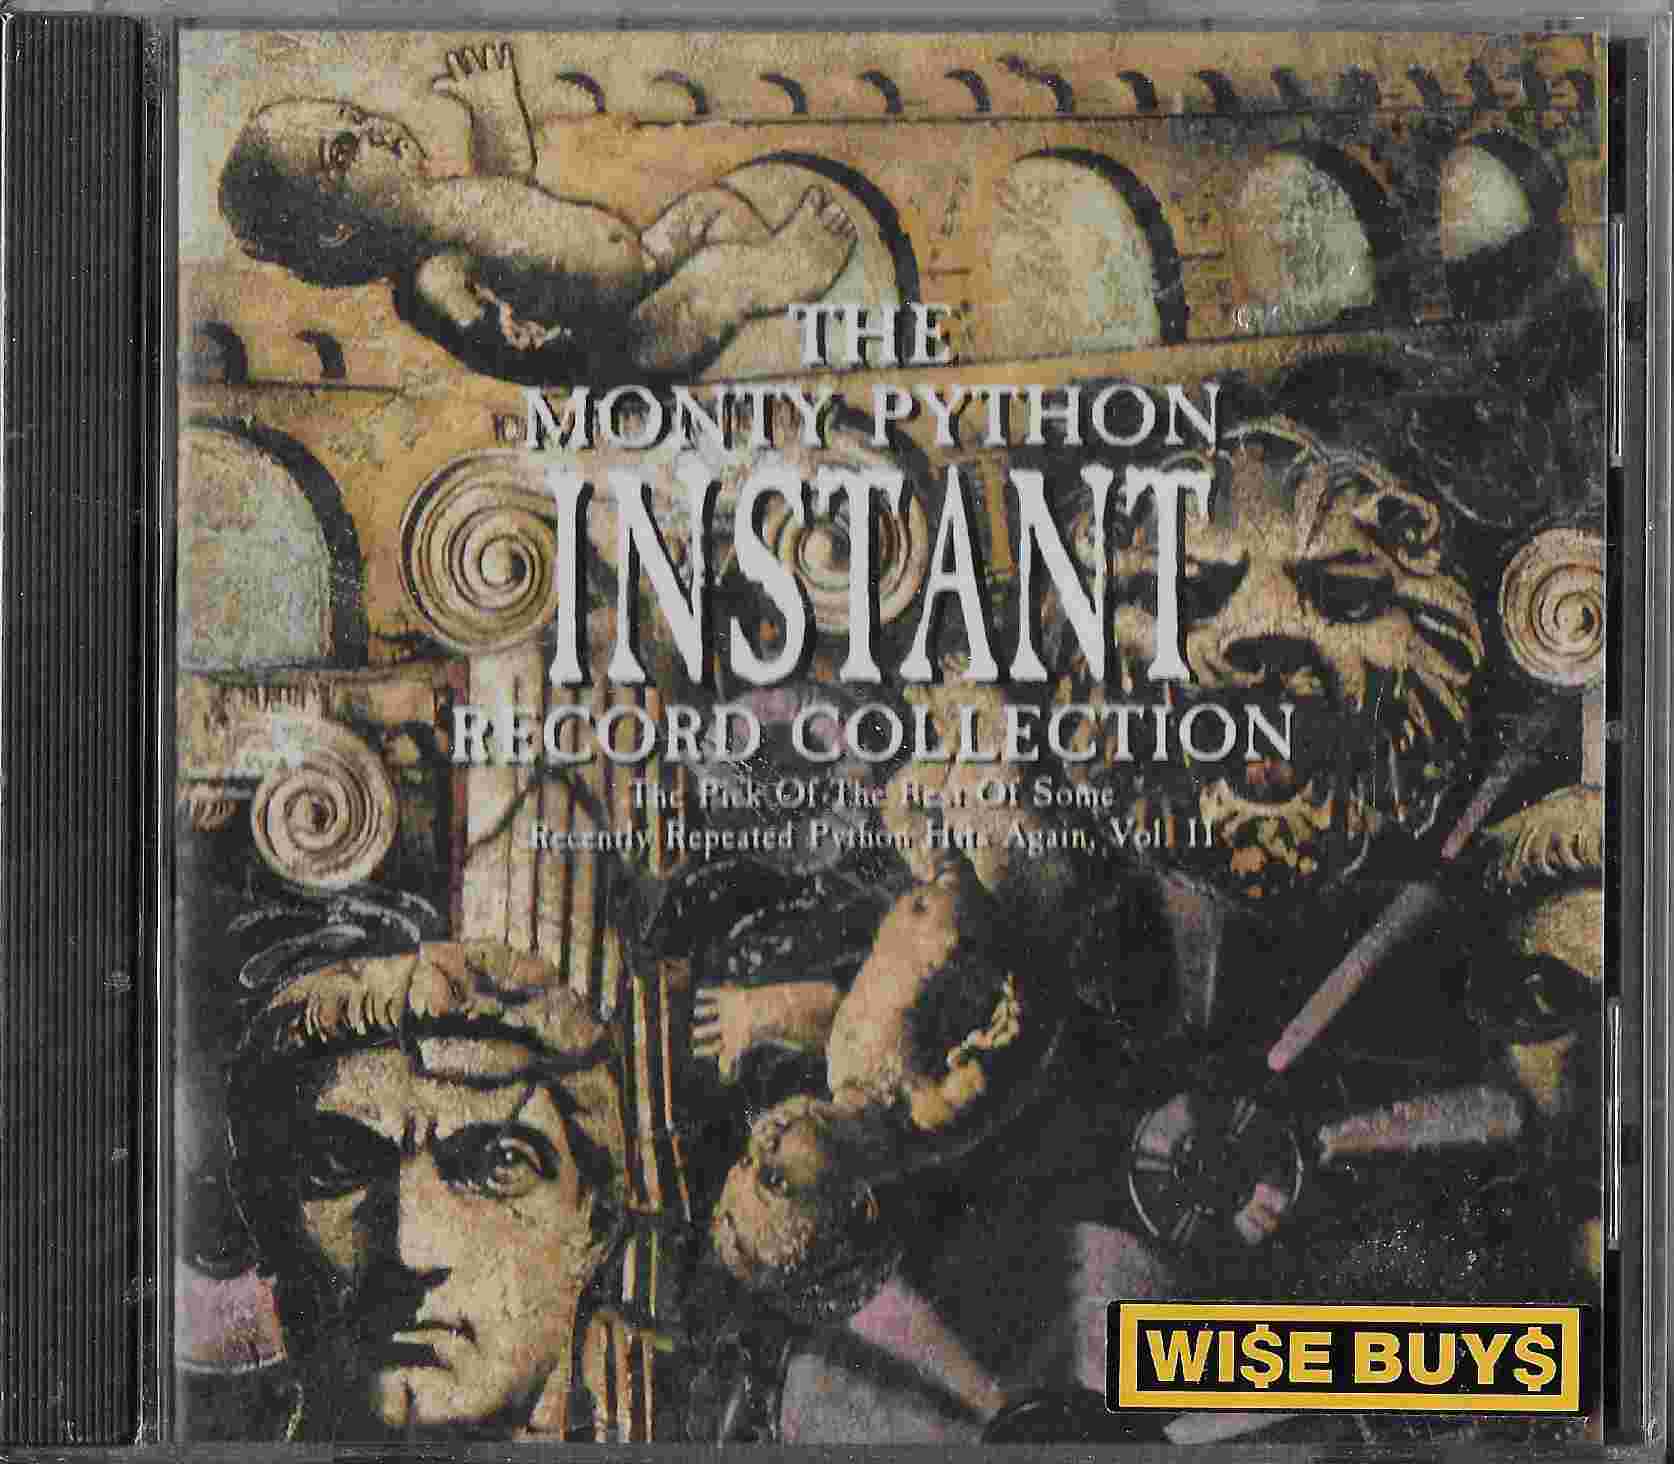 Picture of ARCD 8296 The Monty Python instant record collection - Volume II by artist Monty Python from the BBC cds - Records and Tapes library